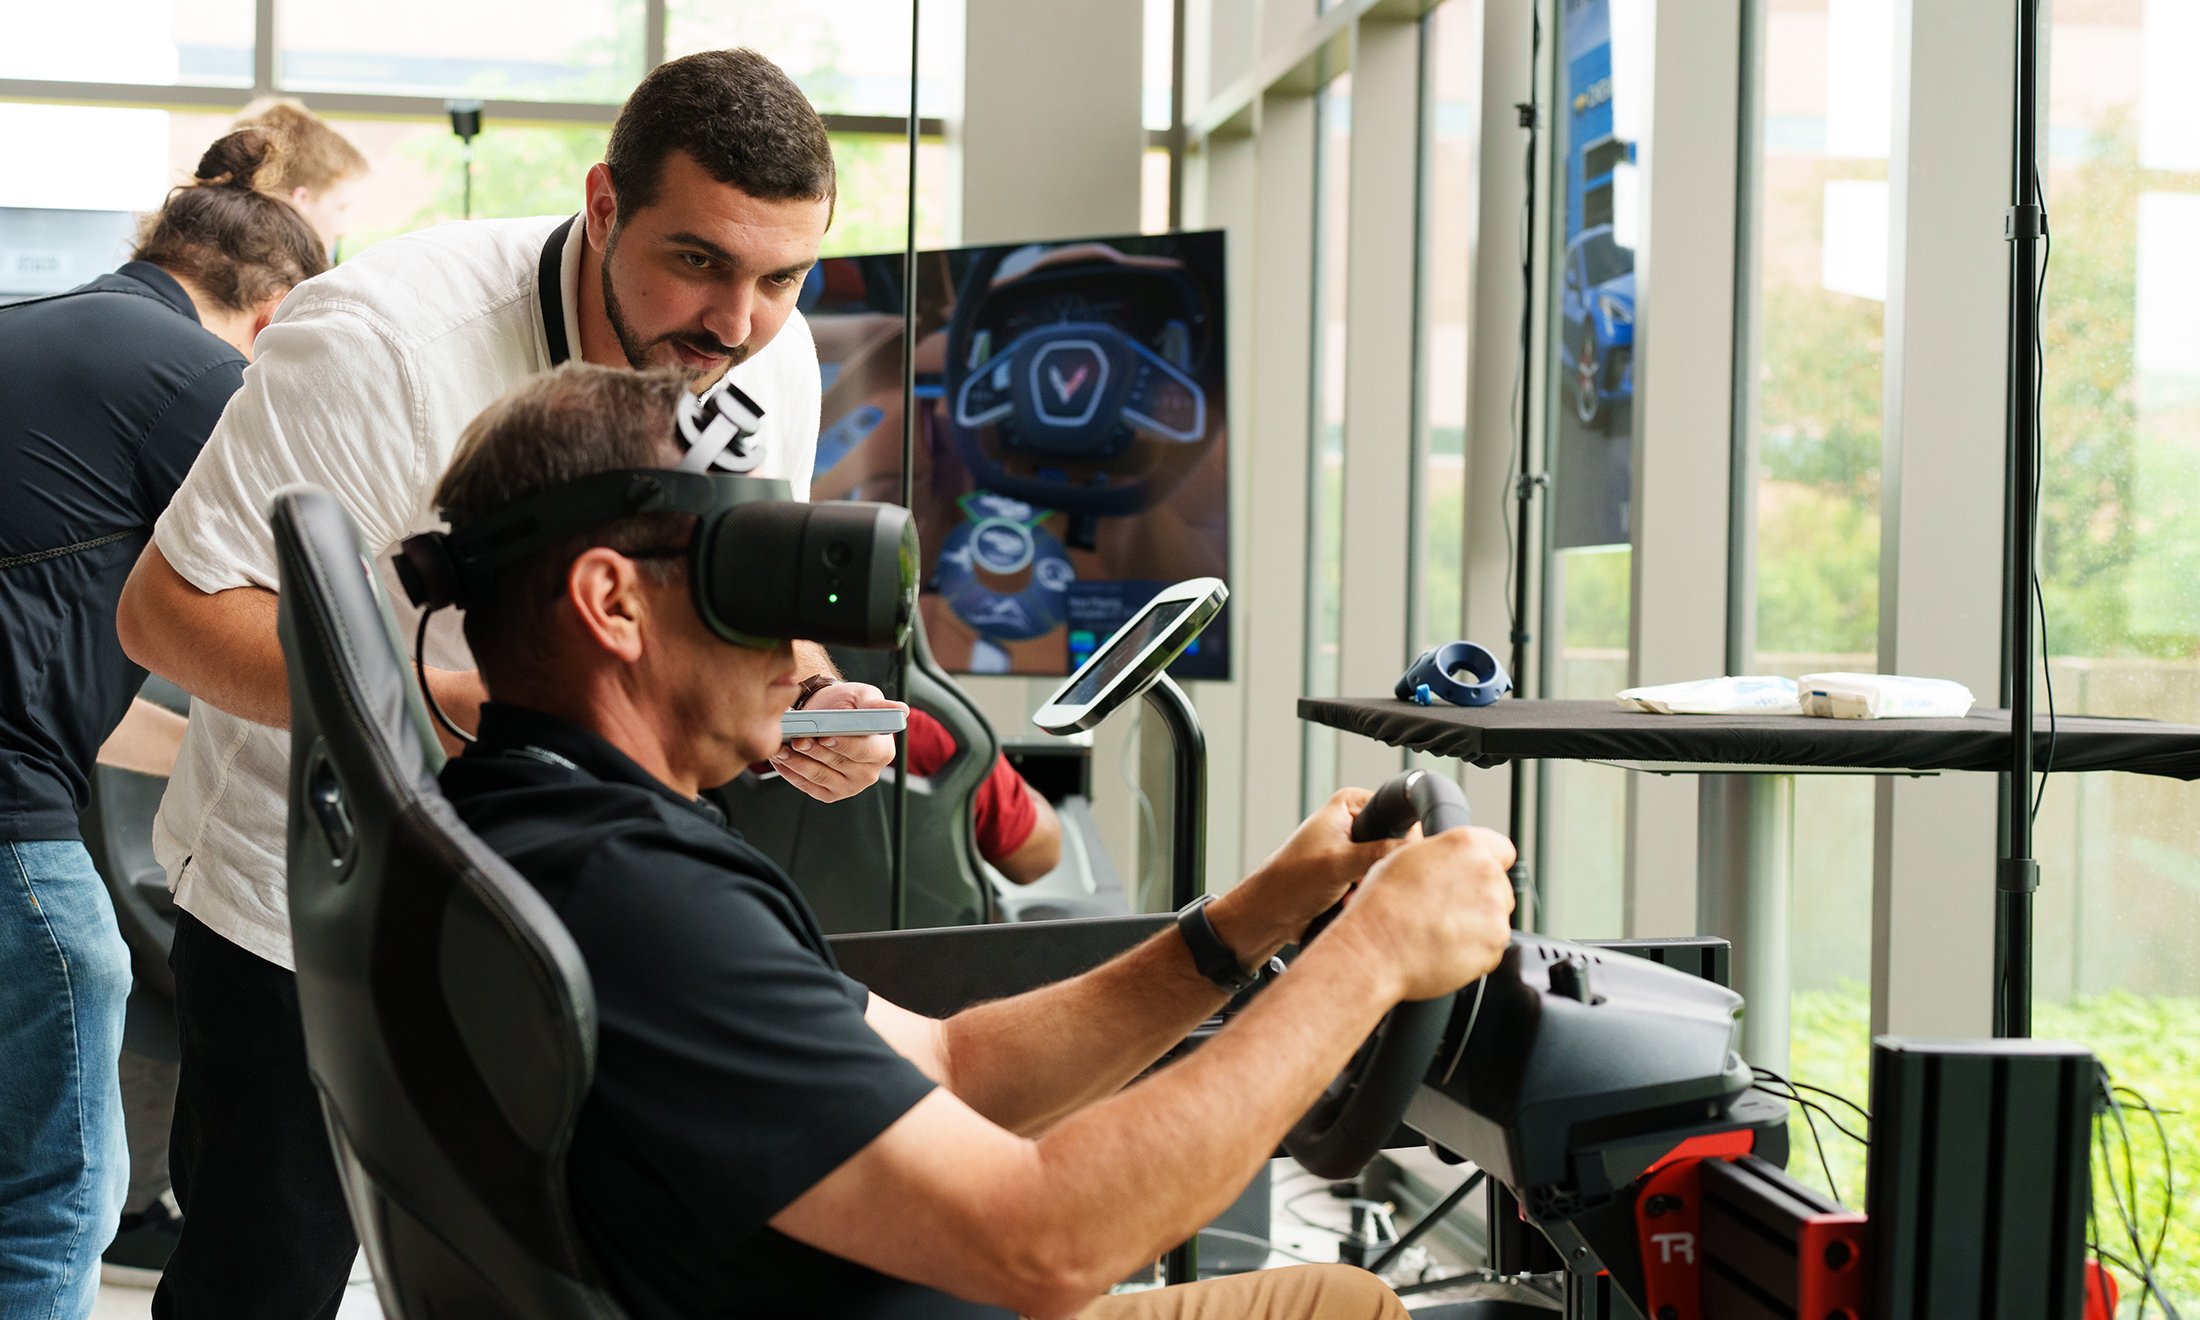 A person watching someone wearing a VR headset and using a steering wheel.